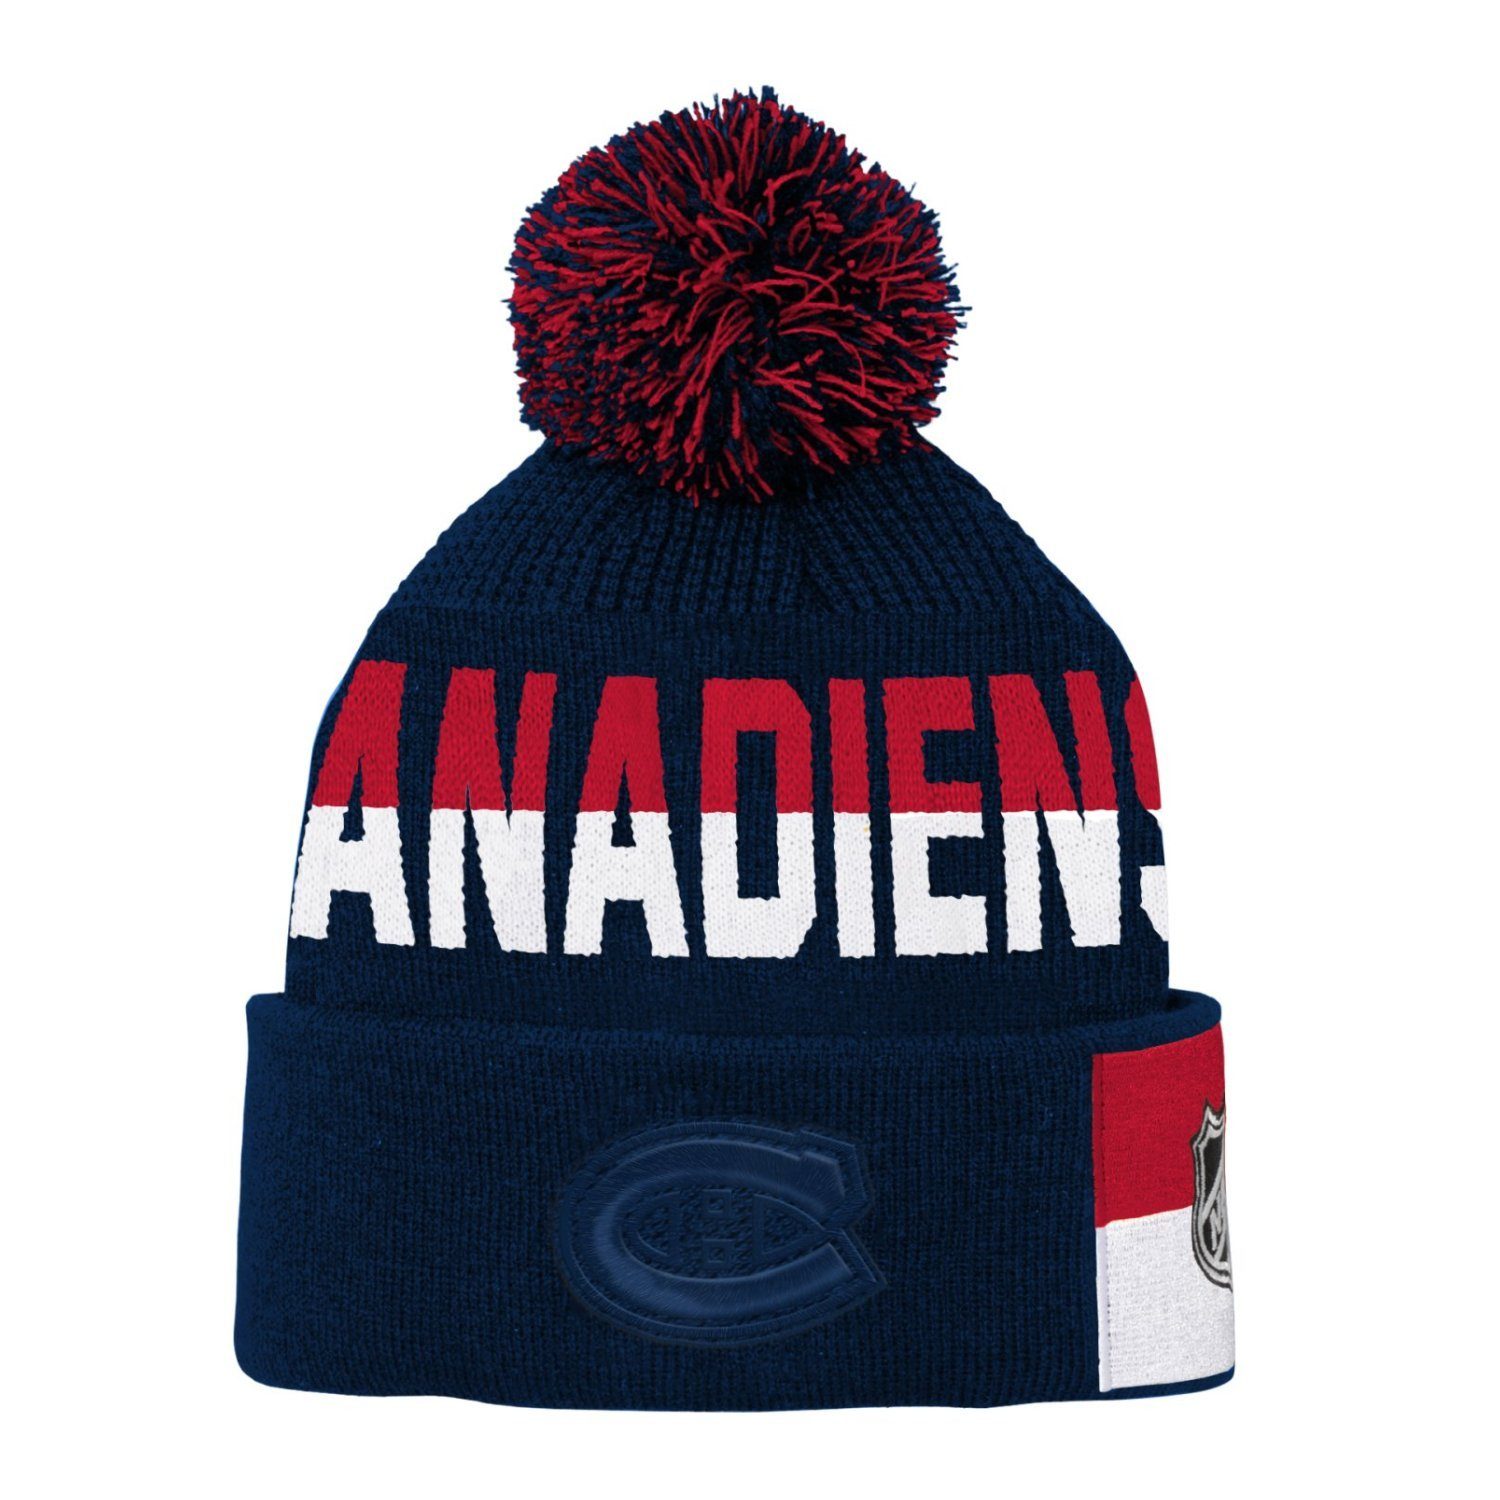 NHL Canadiens Cap Baseball Outerstuff JACQUARD Montreal FACEOFF